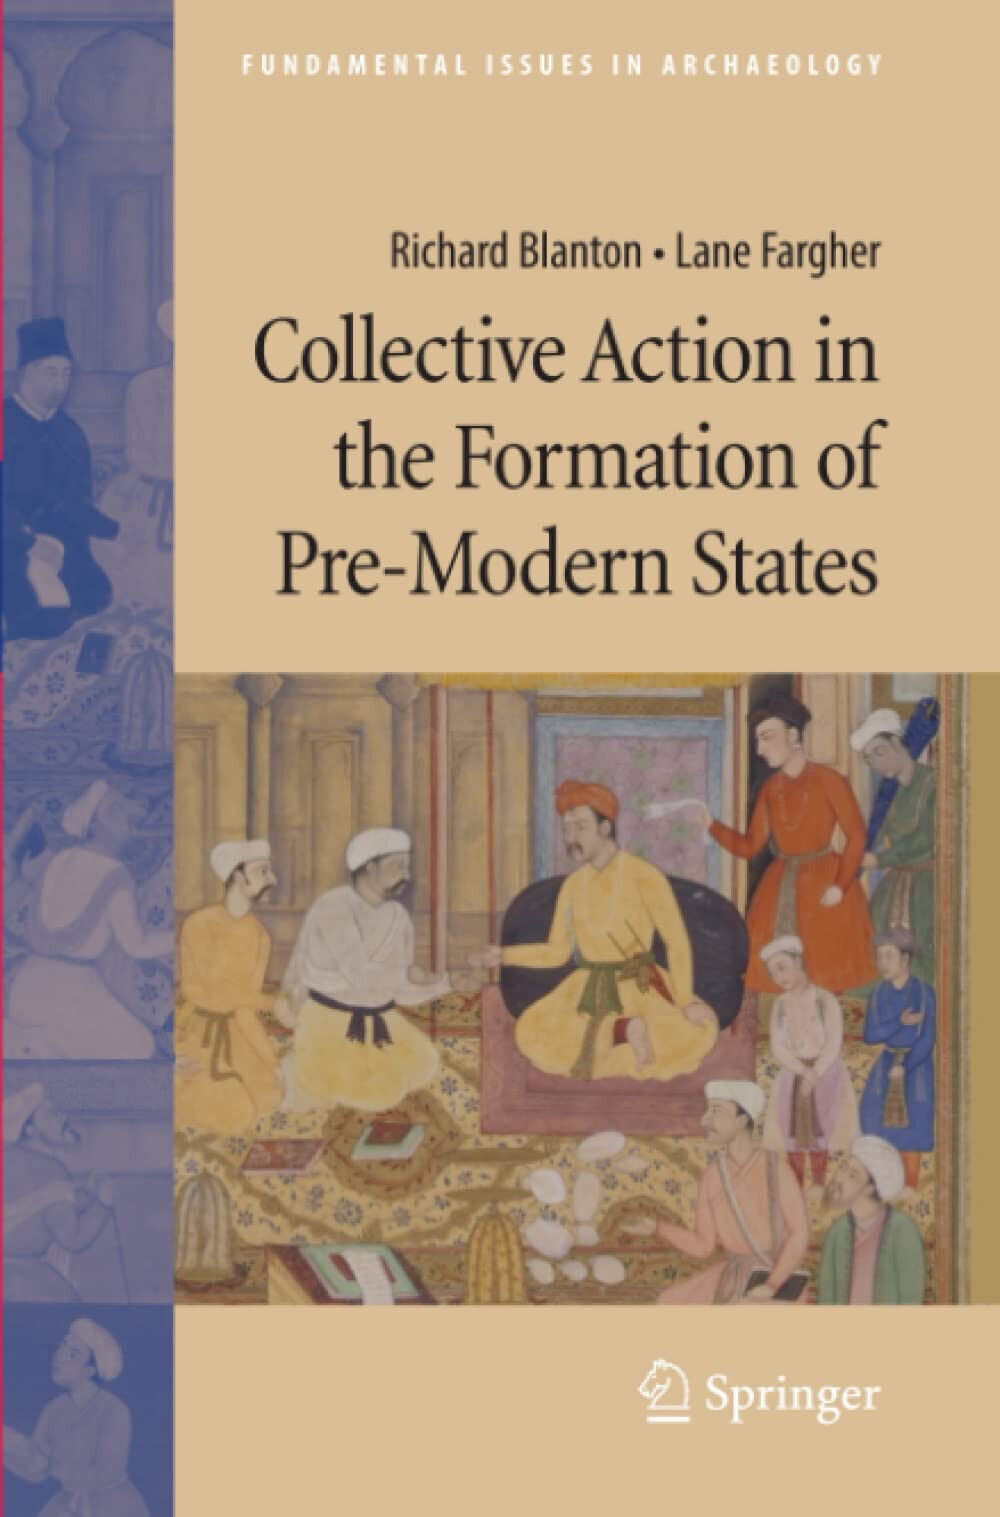 Collective Action in the Formation of Pre-Modern States - Richard Blanton - 2010 libro usato